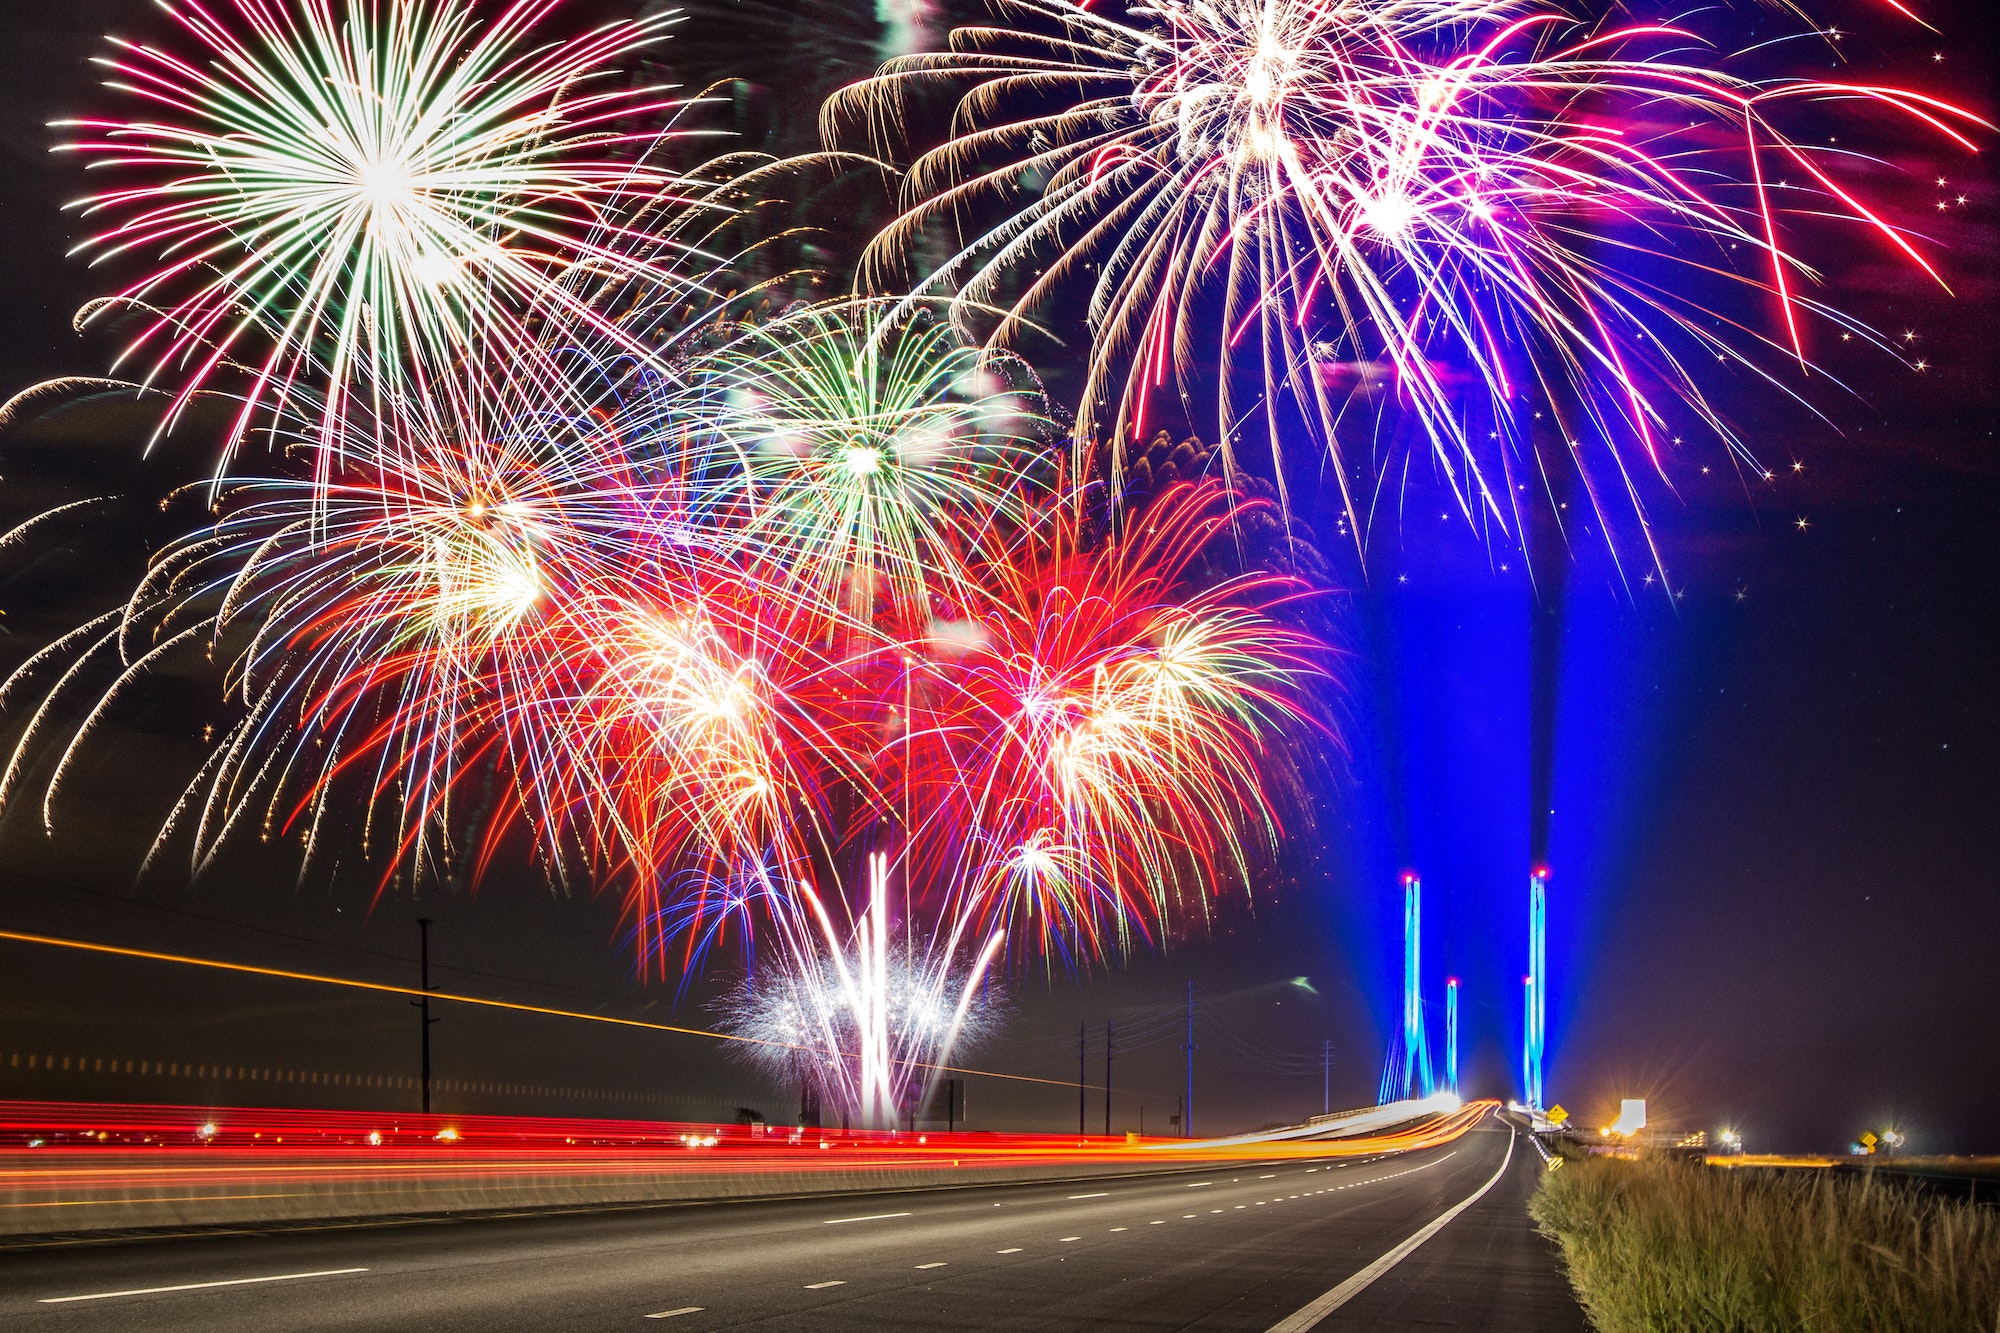 Fireworks at the Indian River Inlet Bridge in Delaware, USA